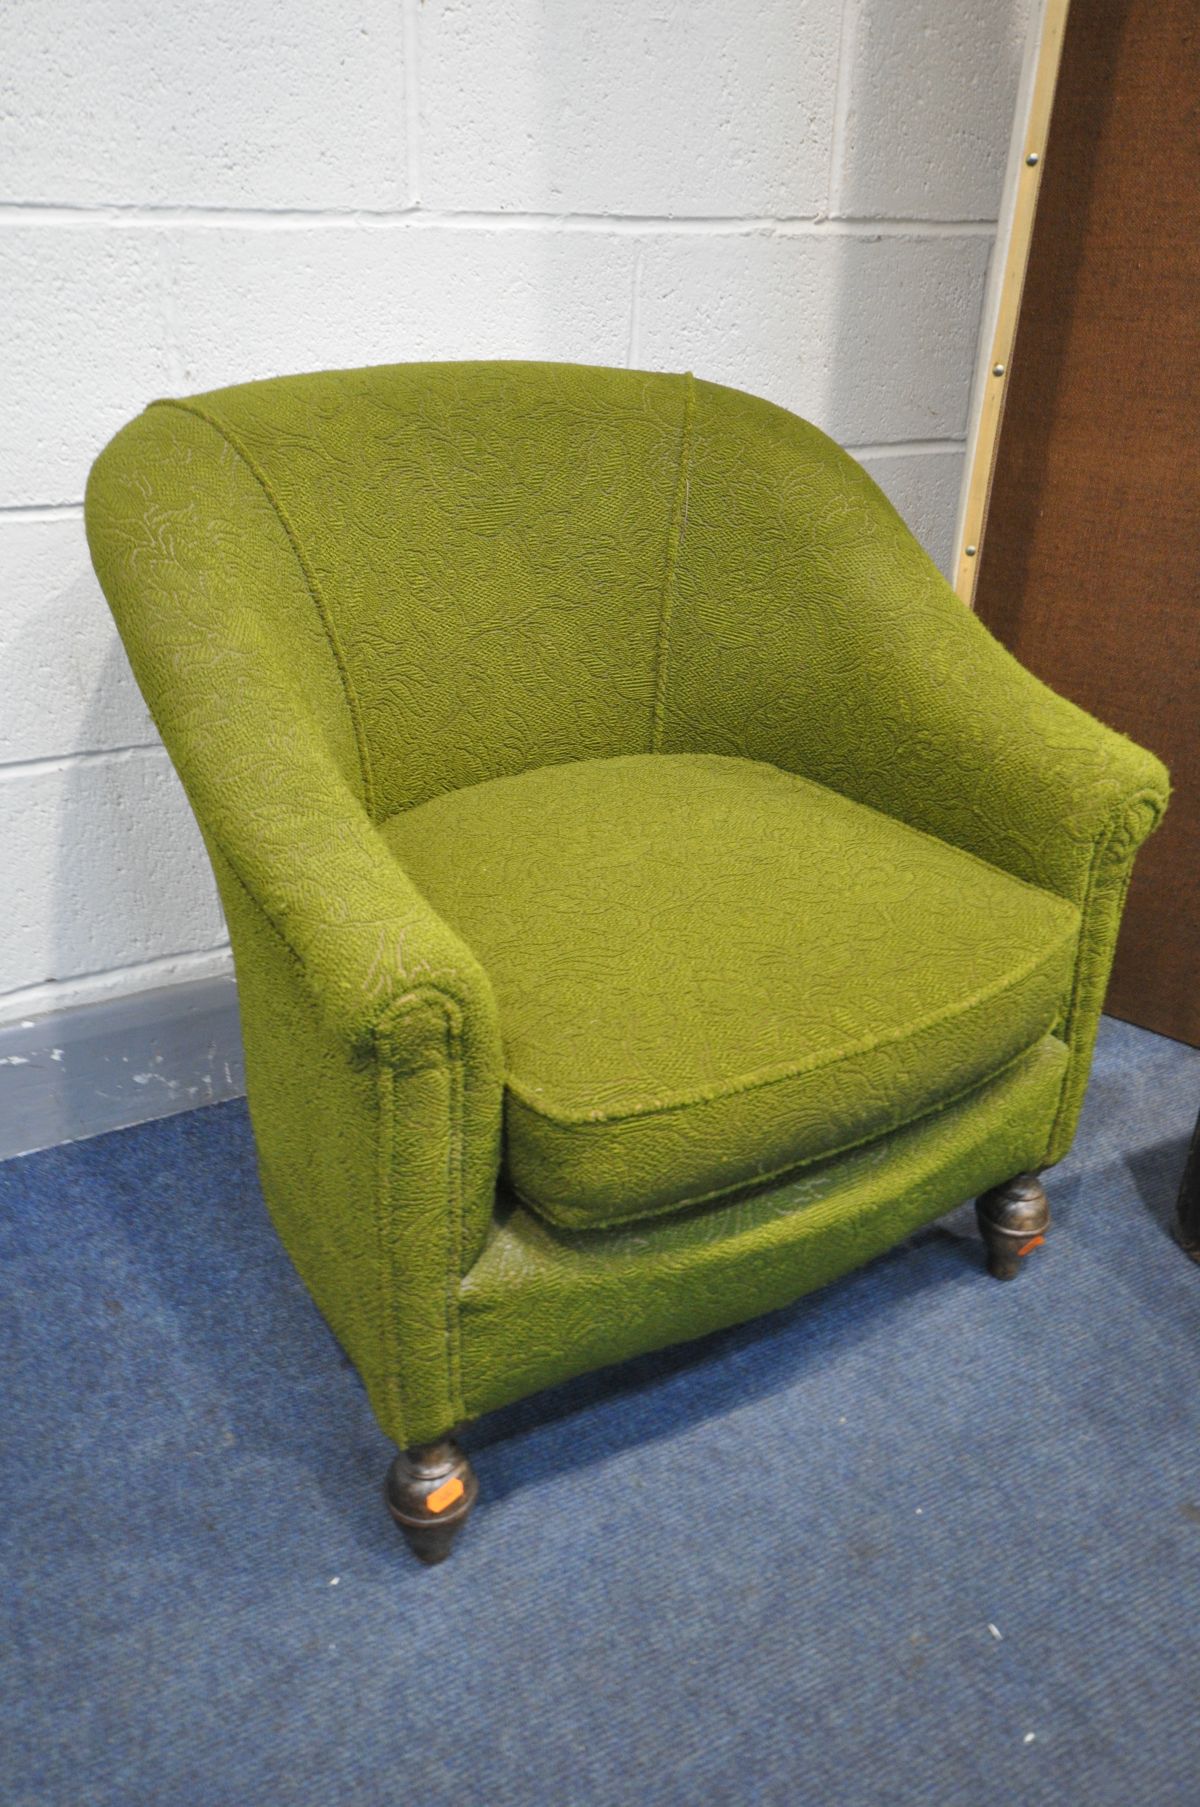 AN EARLY 20TH CENTURY TUB CHAIR with green upholstery, along with a folding floor standing screen - Image 2 of 2